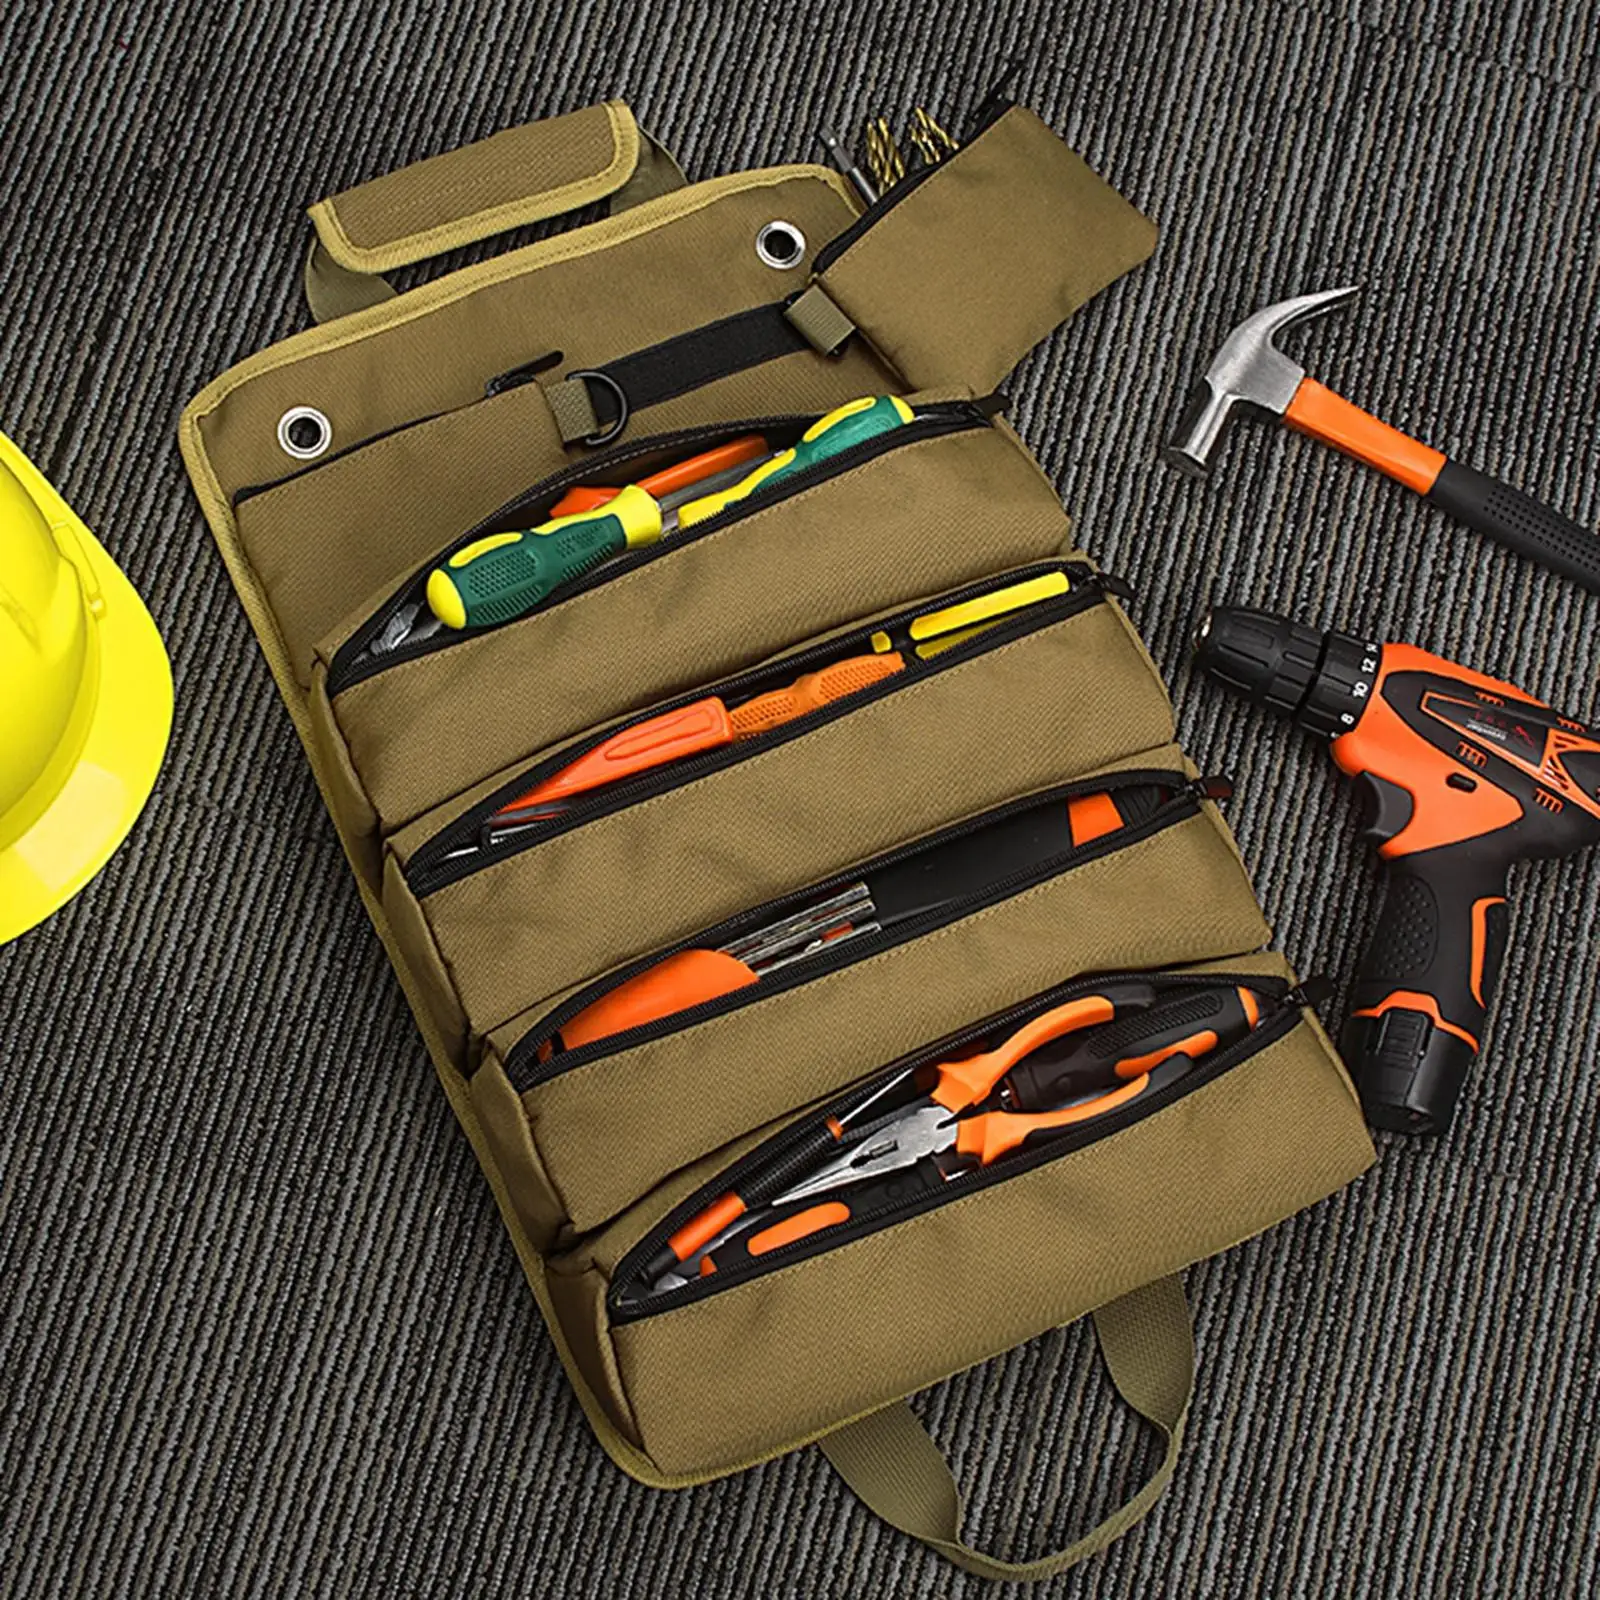 Multifunctional Tool Roll Pouch with Shoulder Strap Oxford Cloth Roll up Tool Bag Organizer for Electrician Plumber Woodworking